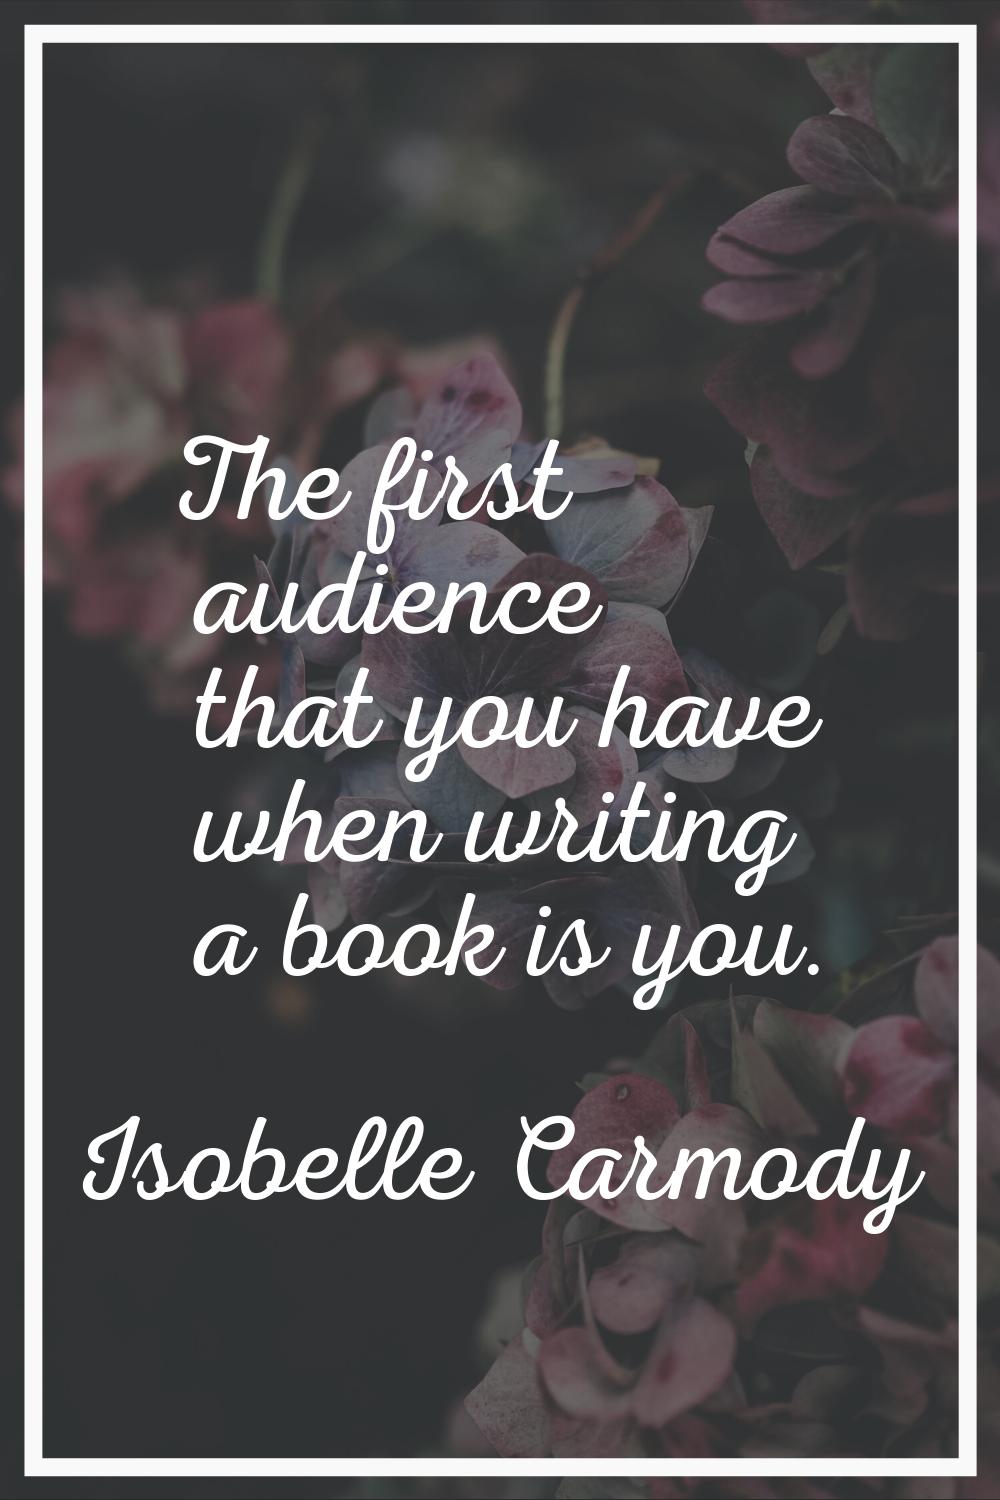 The first audience that you have when writing a book is you.